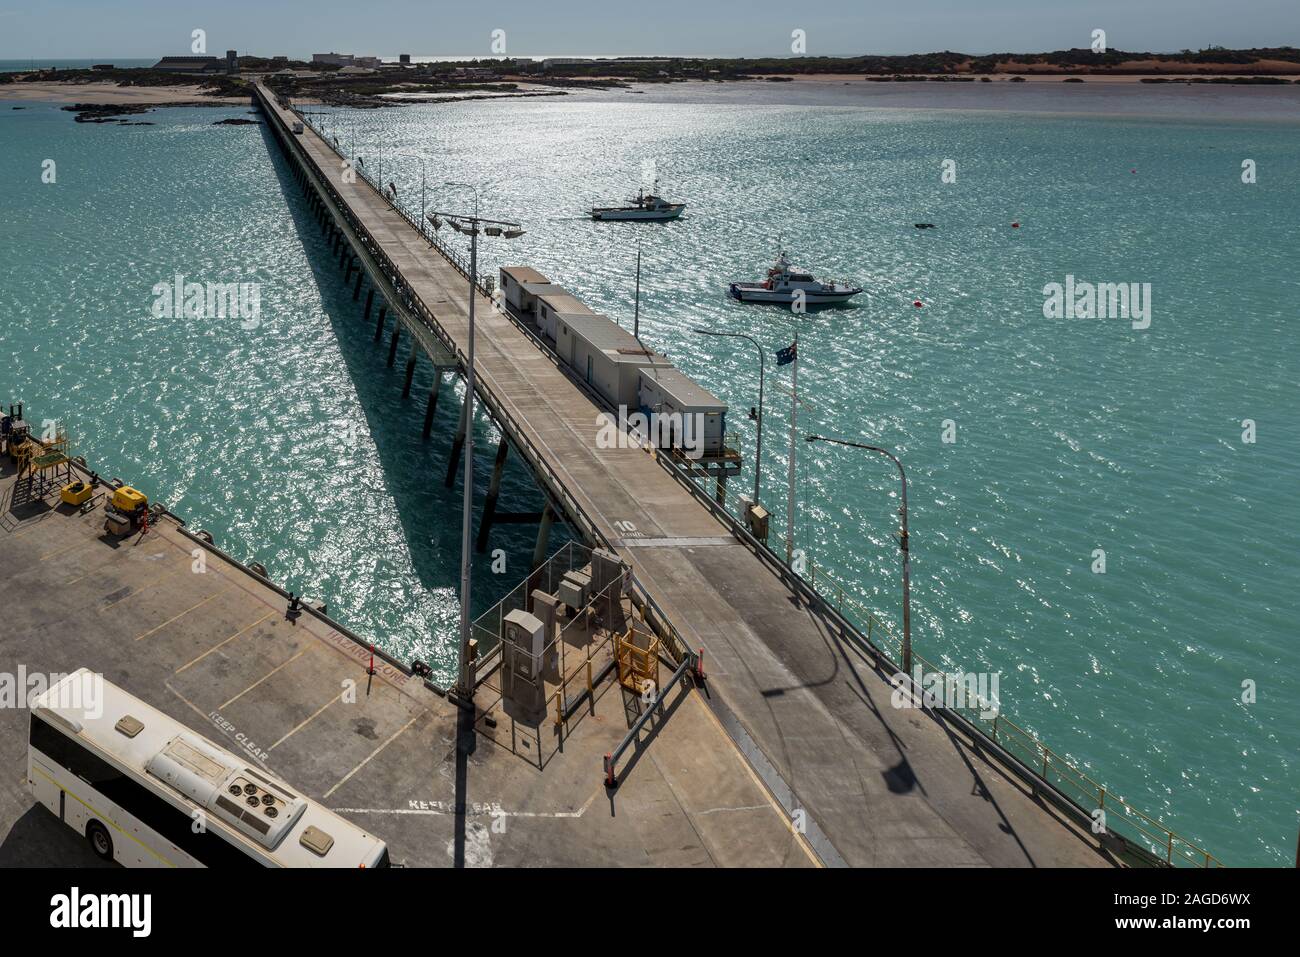 Bridge In Broome In Western Australia In The Sea With Cruise Ships Floating On It Stock Photo Alamy